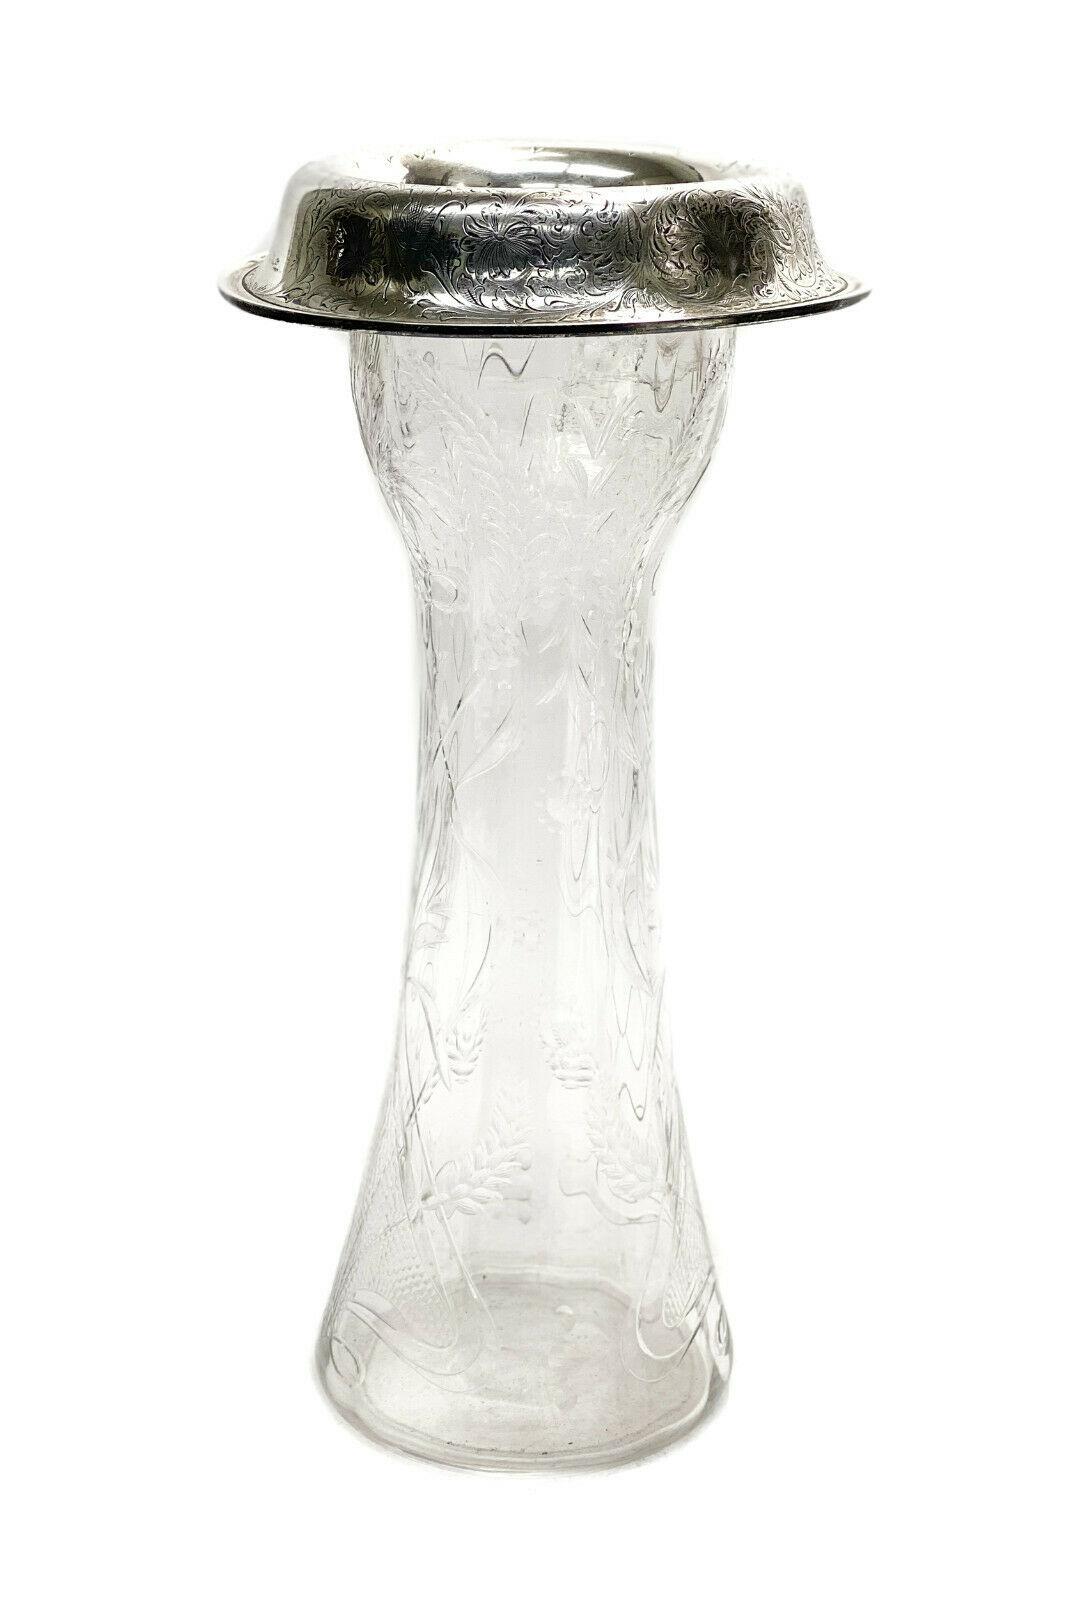 Meriden Britannia Sterling Silver and American Brilliant Cut Glass Vase, c.1900

Etched wheat leaves throughout the exterior of the glass with a polished pontil. The silver rim had had chased foliate scrolls and florals thorughout. Meriden Brittania